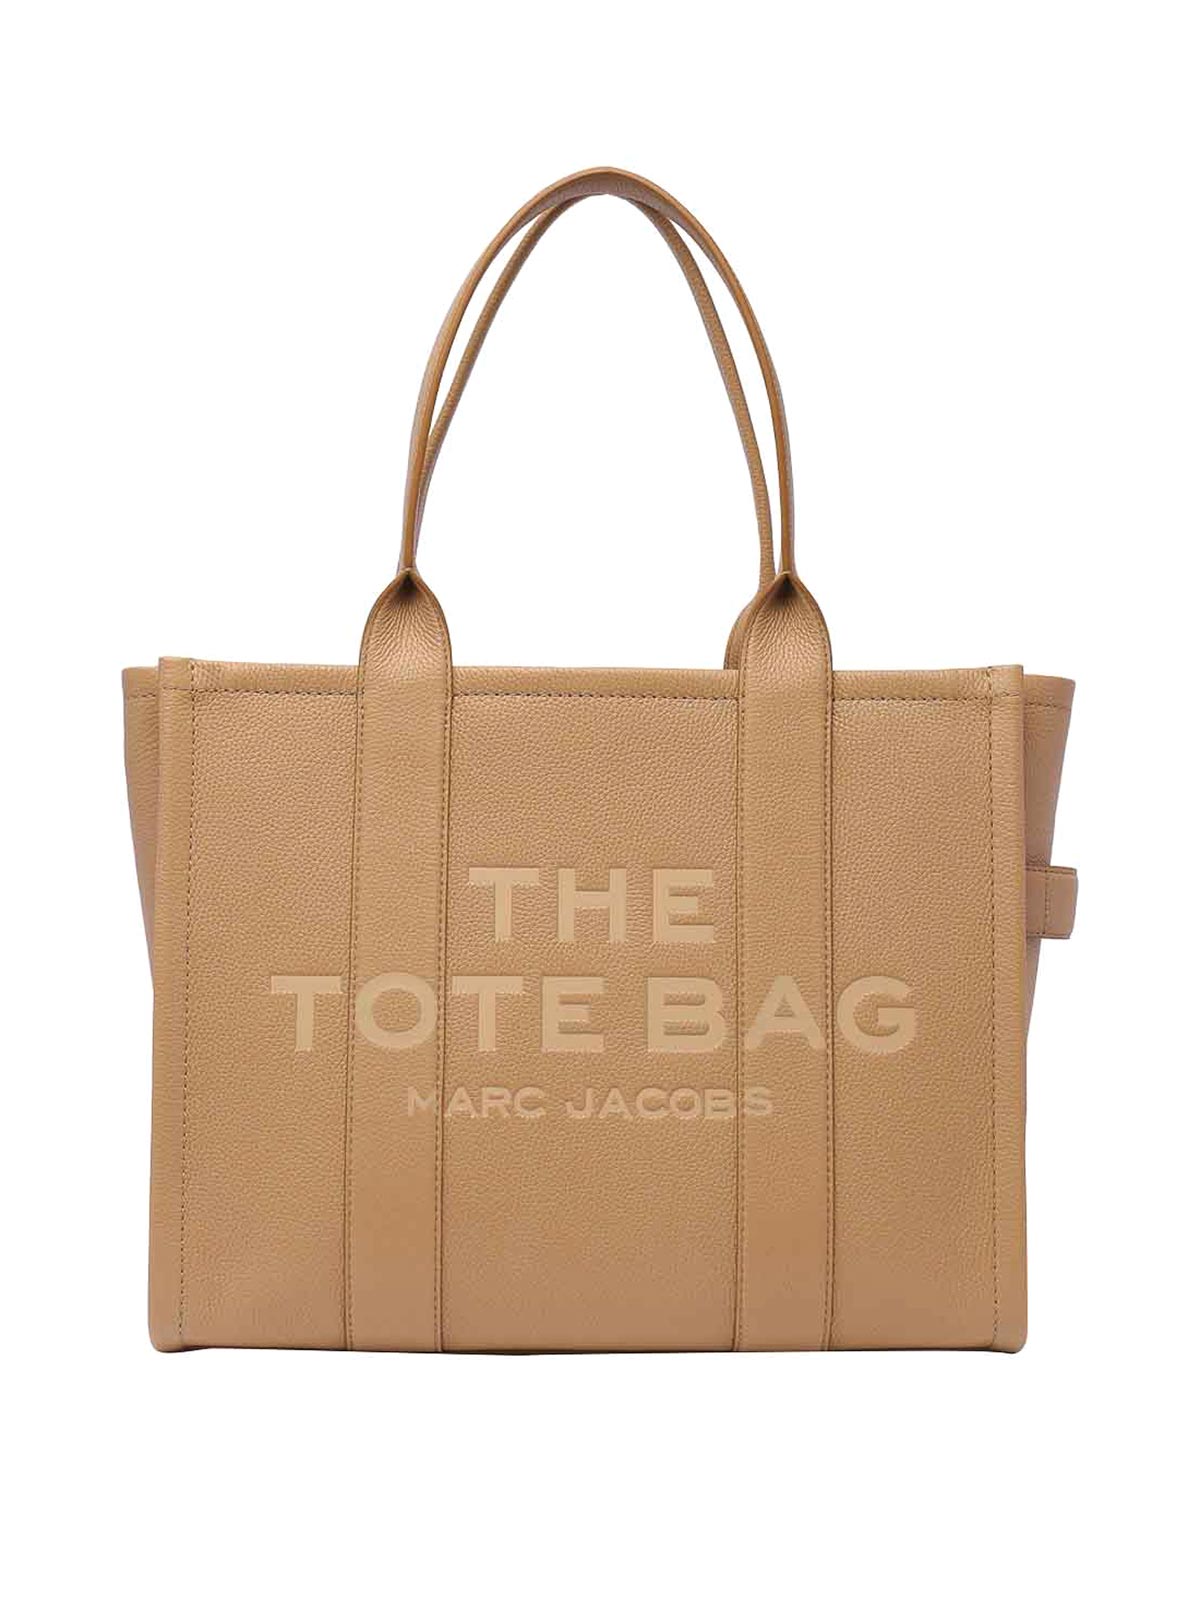 Marc Jacobs The Leather Large Tote Bag In Beige